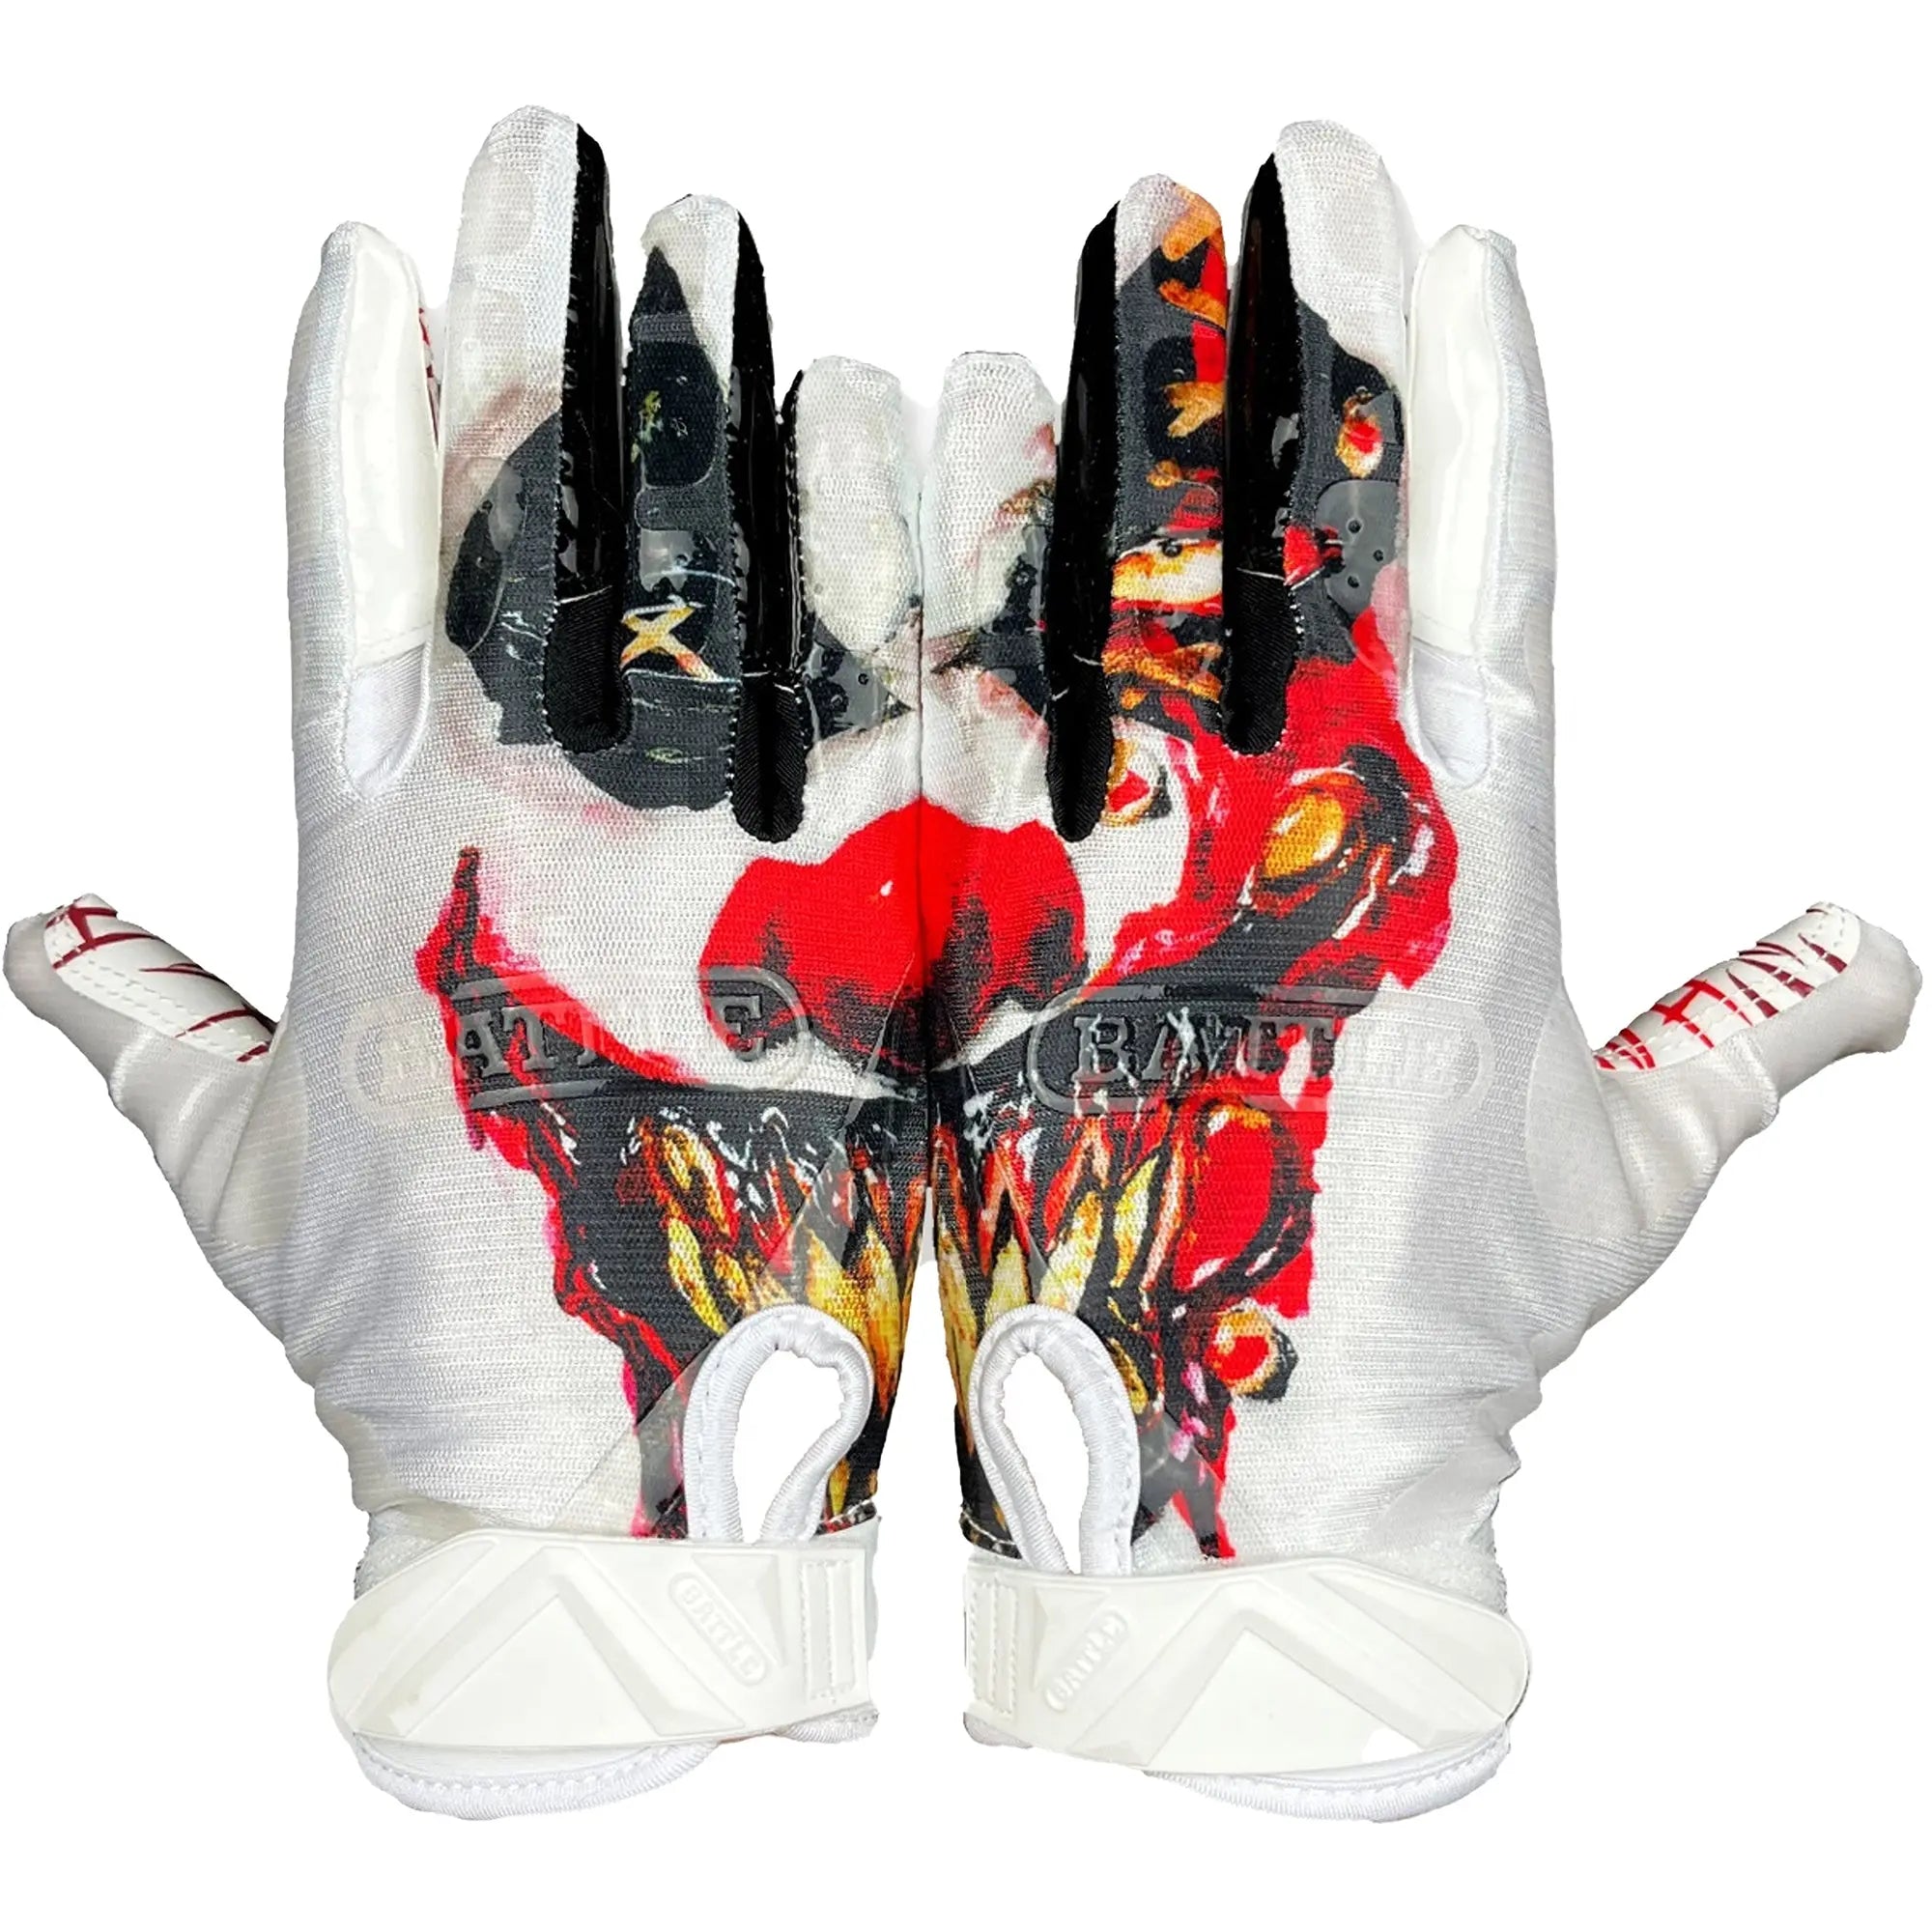 Battle Sports Adult Krazy Klown Cloaked Football Receiver Gloves - Large Battle Sports